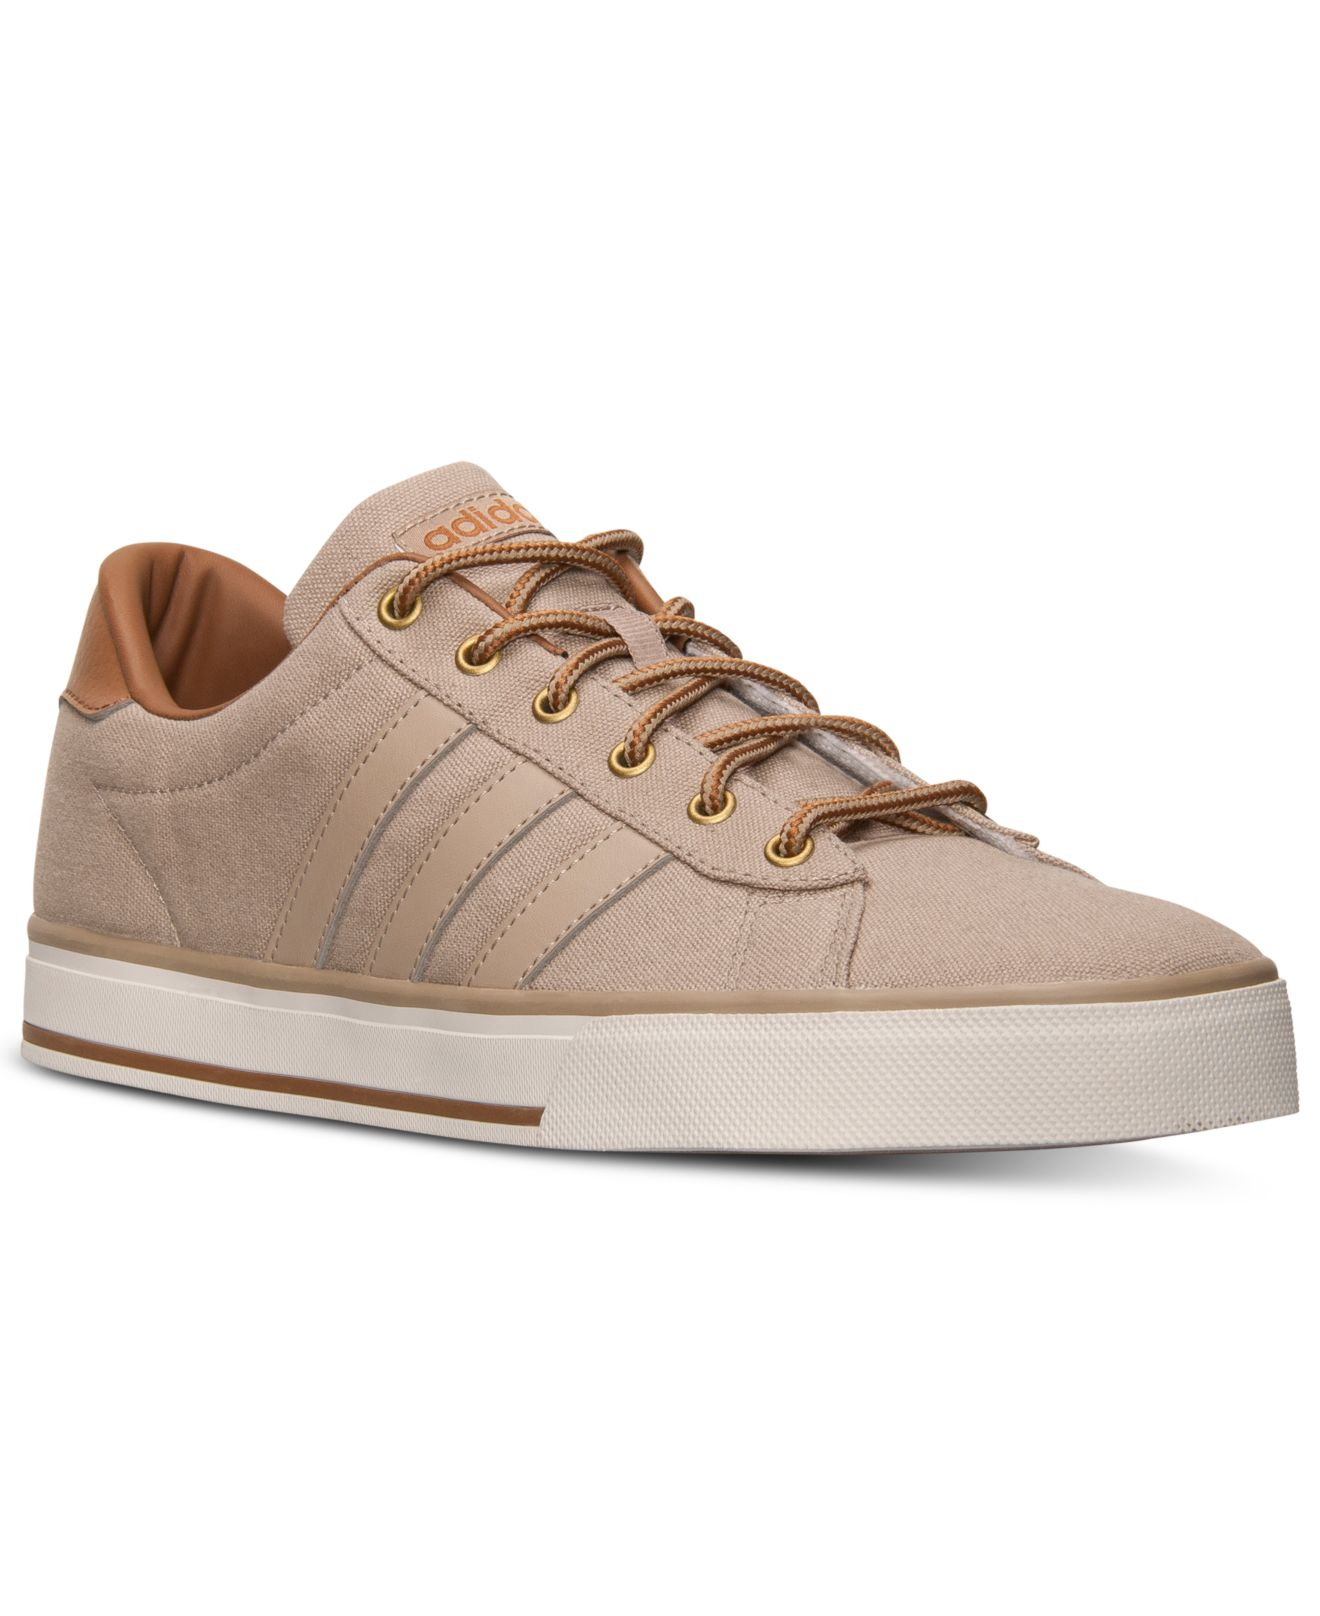 adidas Men's Neo Daily Vulc Canvas Casual Sneakers From Finish ... صندوق الحظ